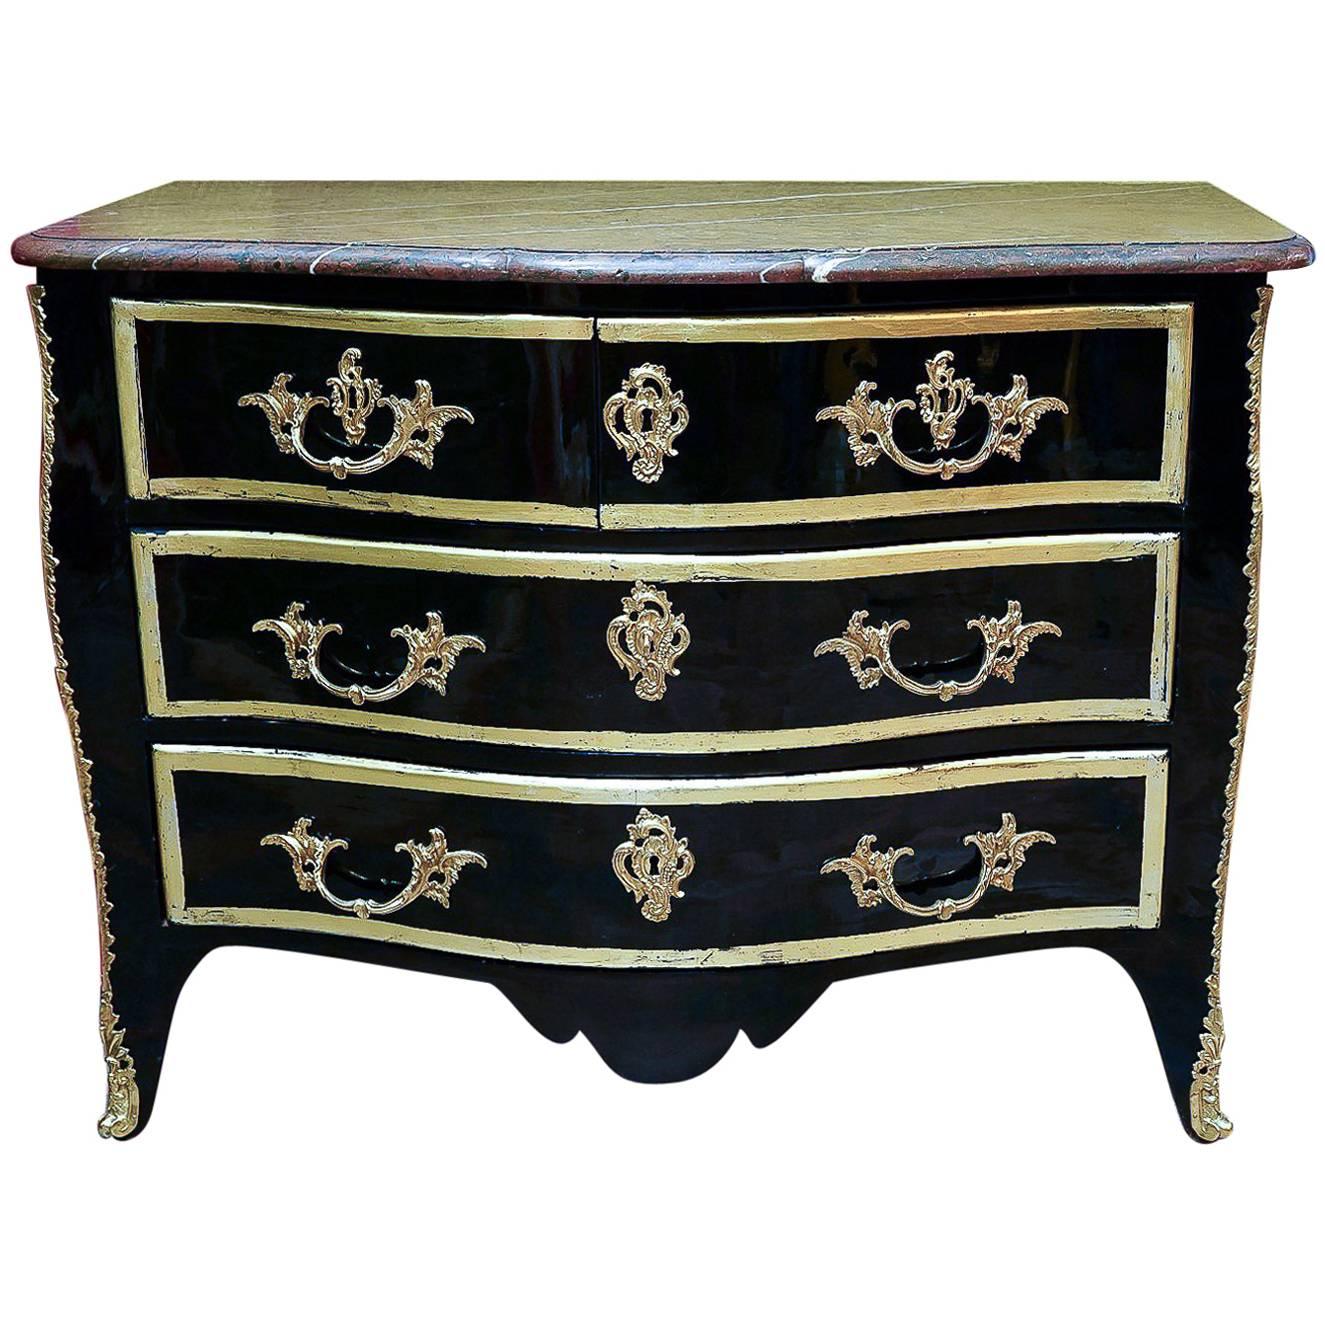 French Regence Period Serpentine Black Lacquered Commode, circa 1720-1730 For Sale